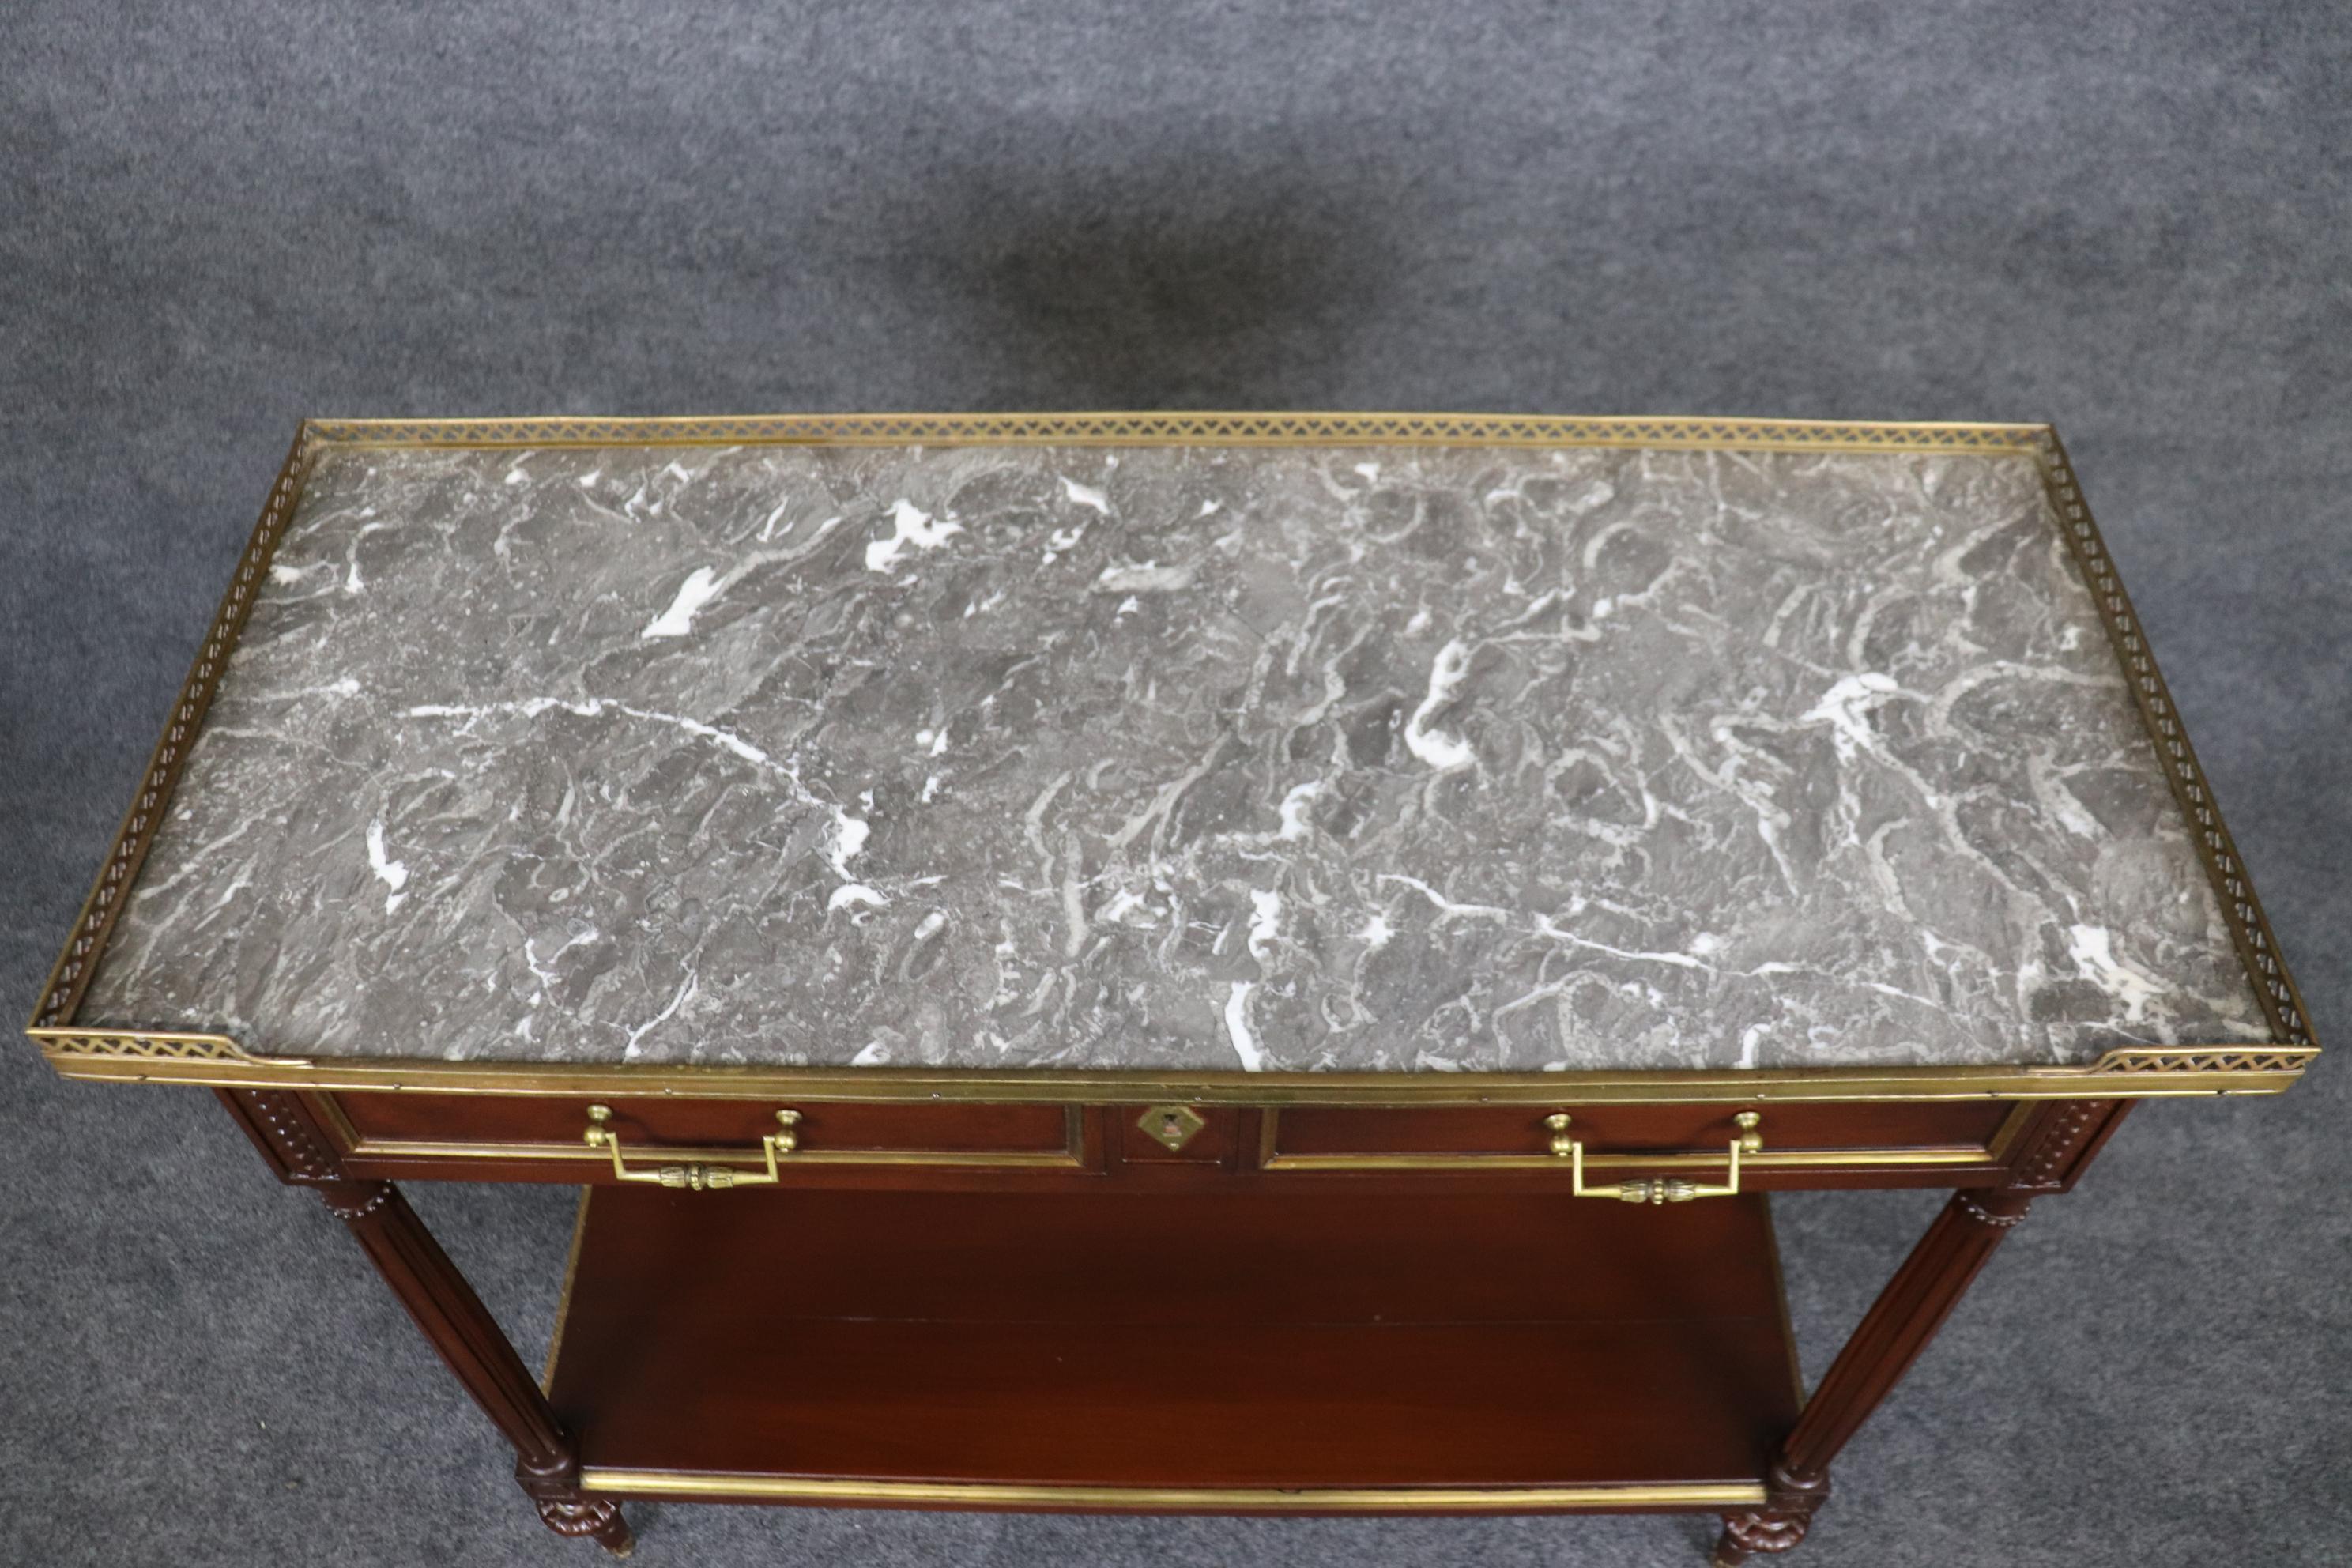 Even though this is not signed we strongly believe this to be Maison Jansen because of the quality of the piece and components of brass and marble. The quality, level of sophistication and overal proportions are beautifully handled and the piece is